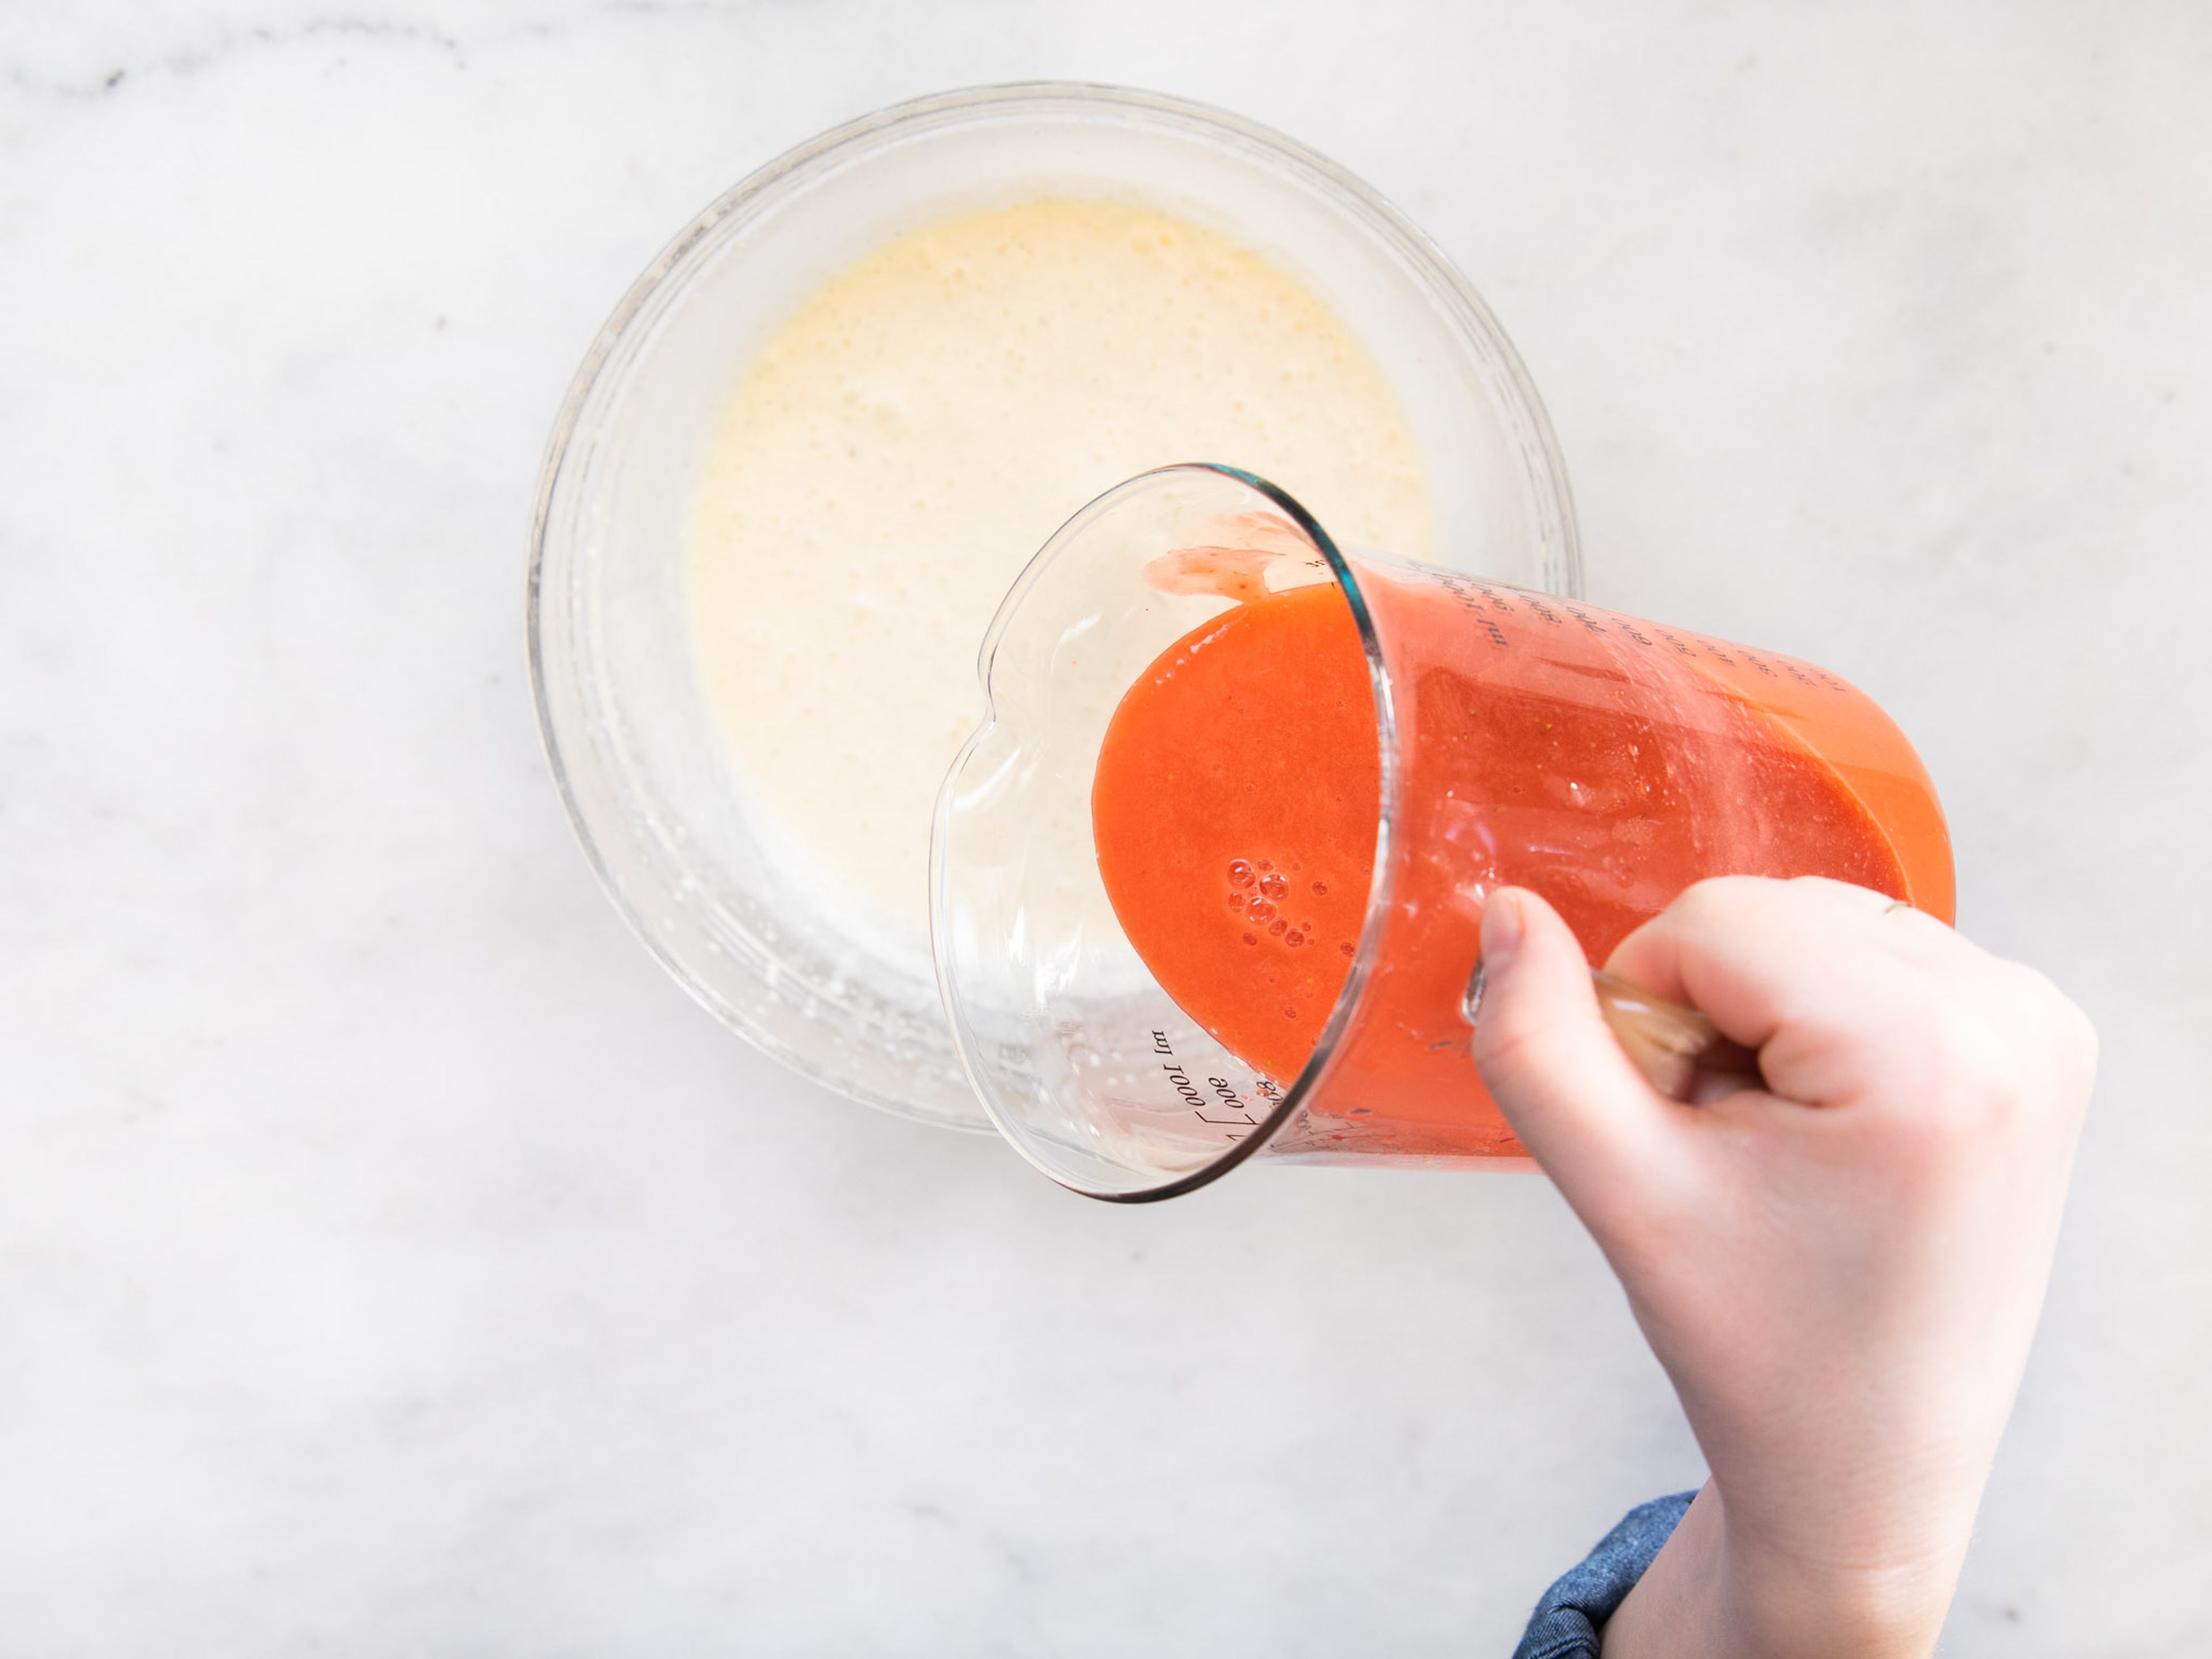 Scrape the vanilla pod and add to a bowl. Add condensed milk and the remaining cream and mix with a hand beater until foamy and aerated, approx. 5 min. Gently fold in ¾ of the rhubarb purée and ¾ of the almond Florentine.